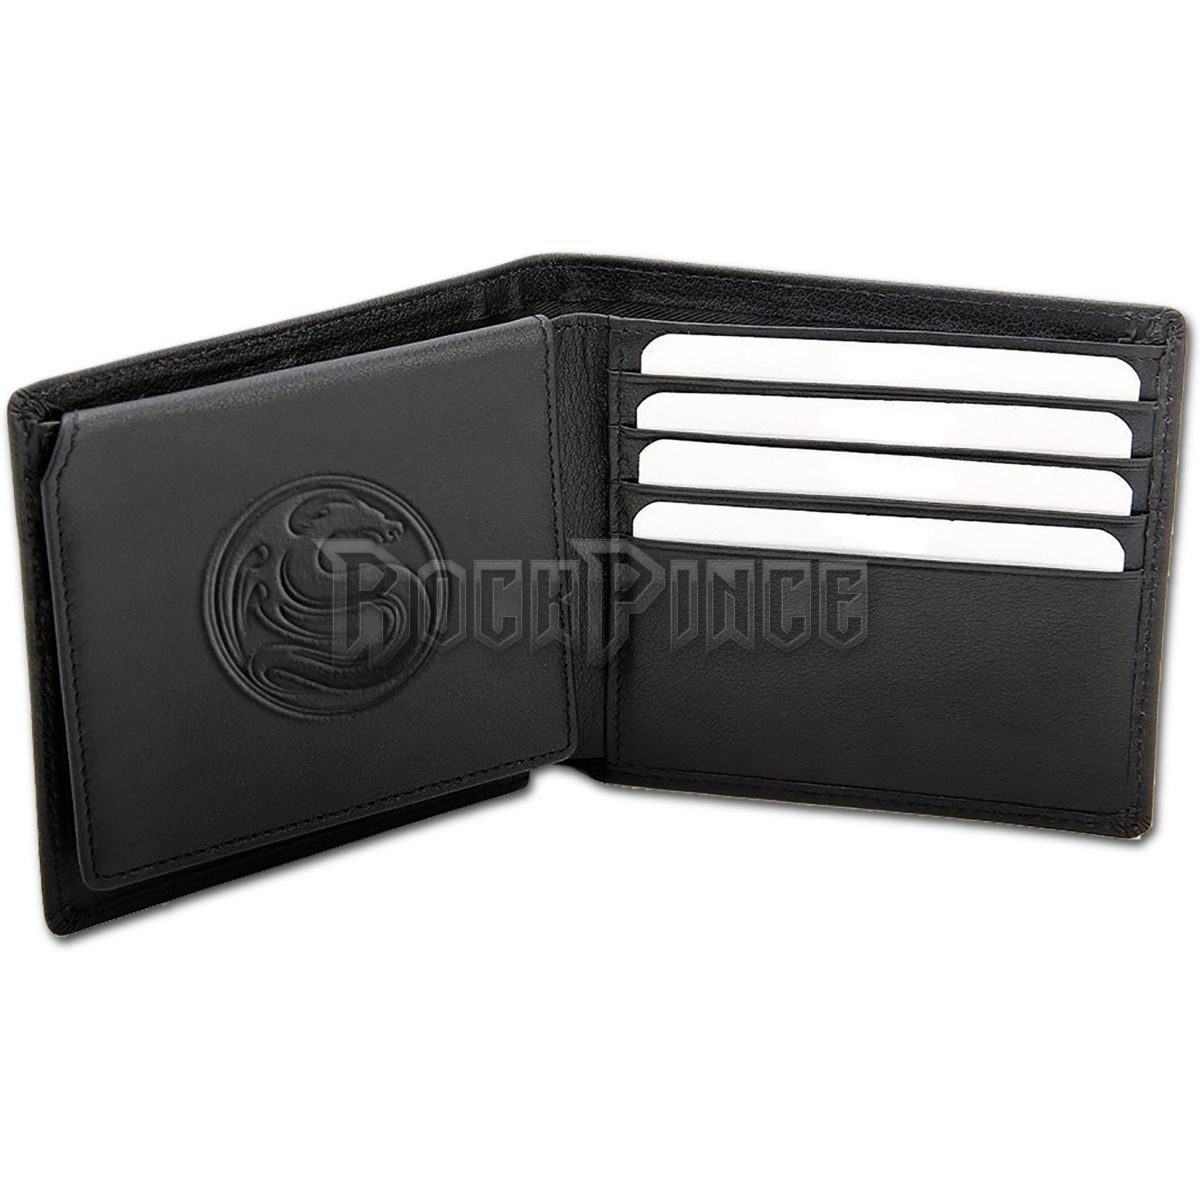 DEATH GRIP - BiFold Wallet with RFID Blocking and Gift Box - T107A309